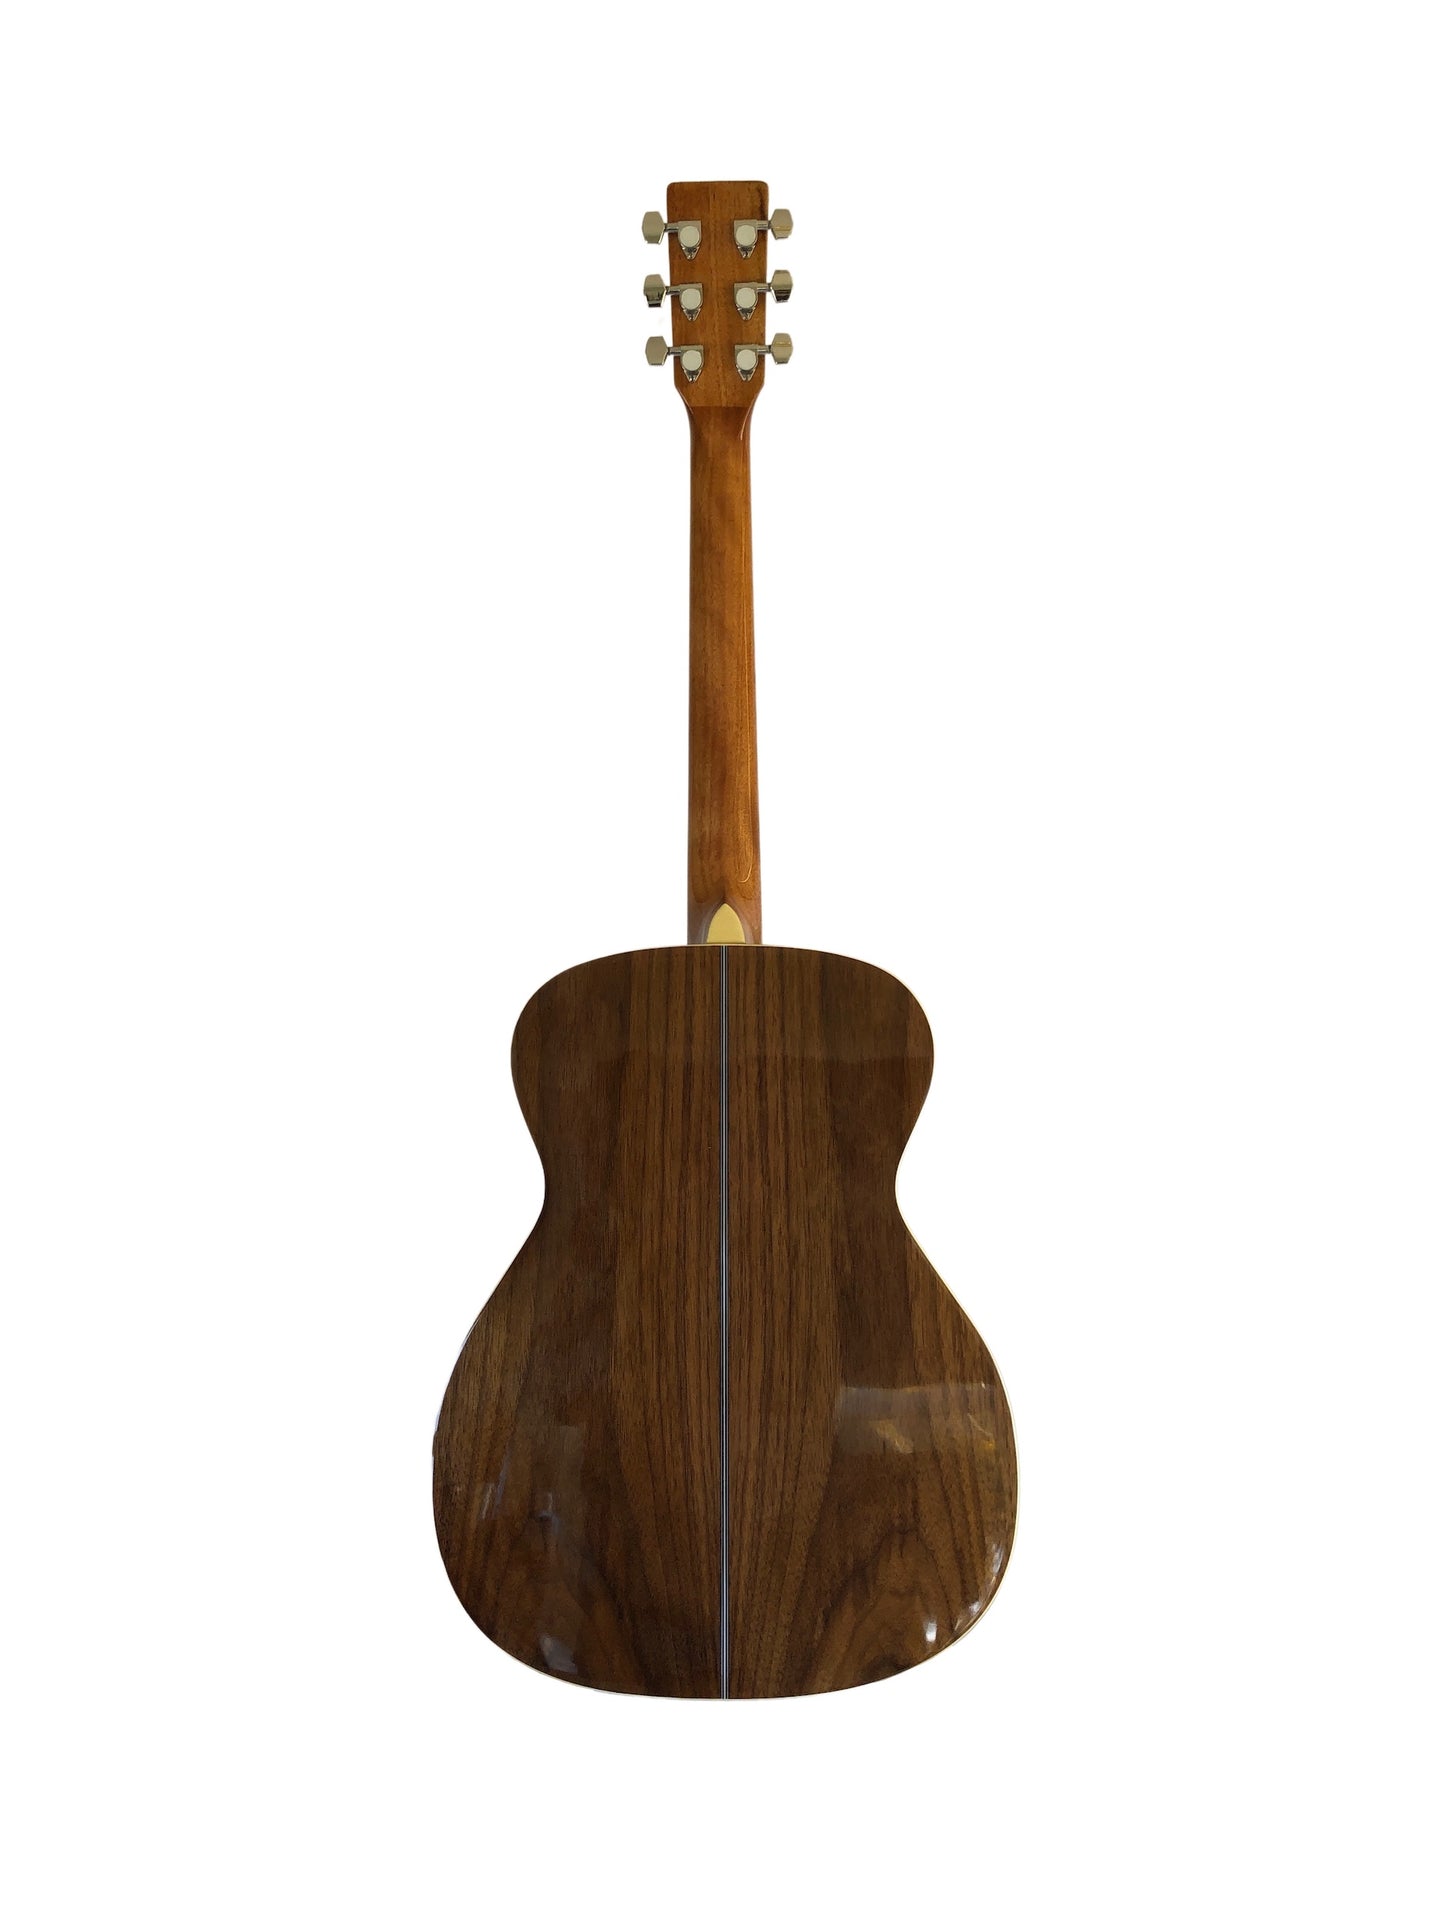 Photo of the back of the Revival rg-25 acoustic guitar.